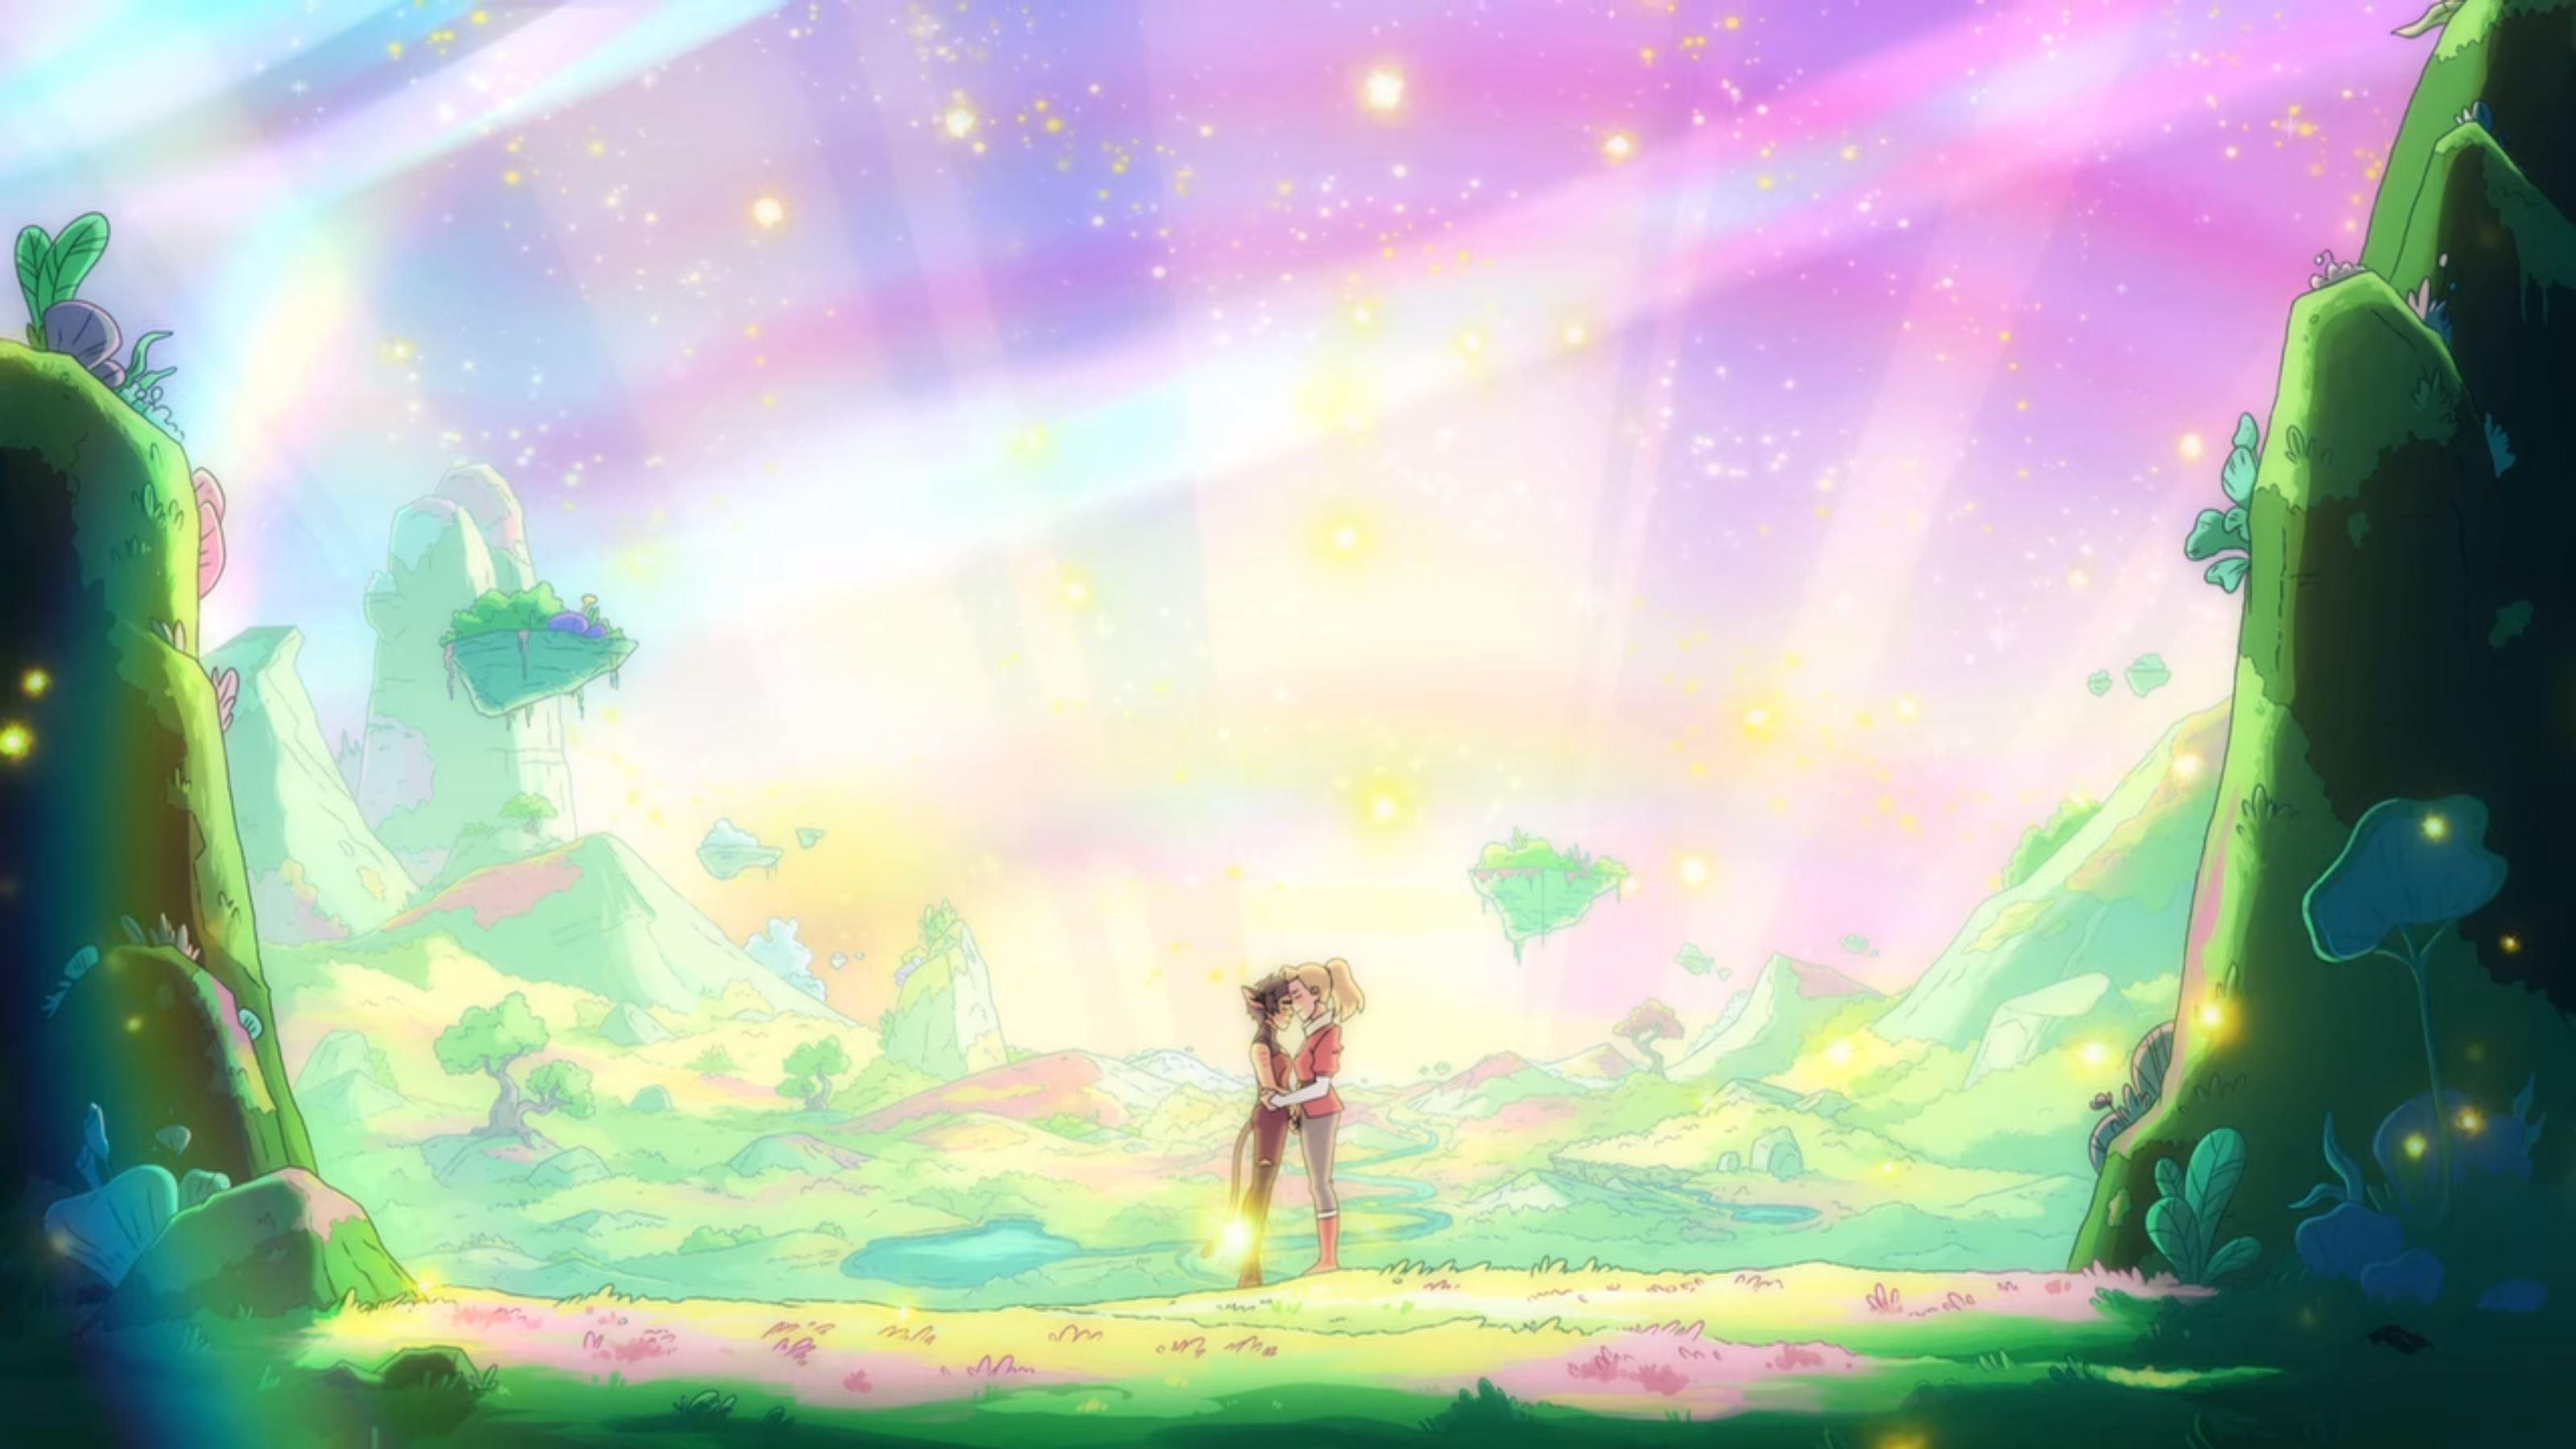 SPOILER BUT A GREAT BACKGROUND OMG THIS WAS AN AWESOME FINALE